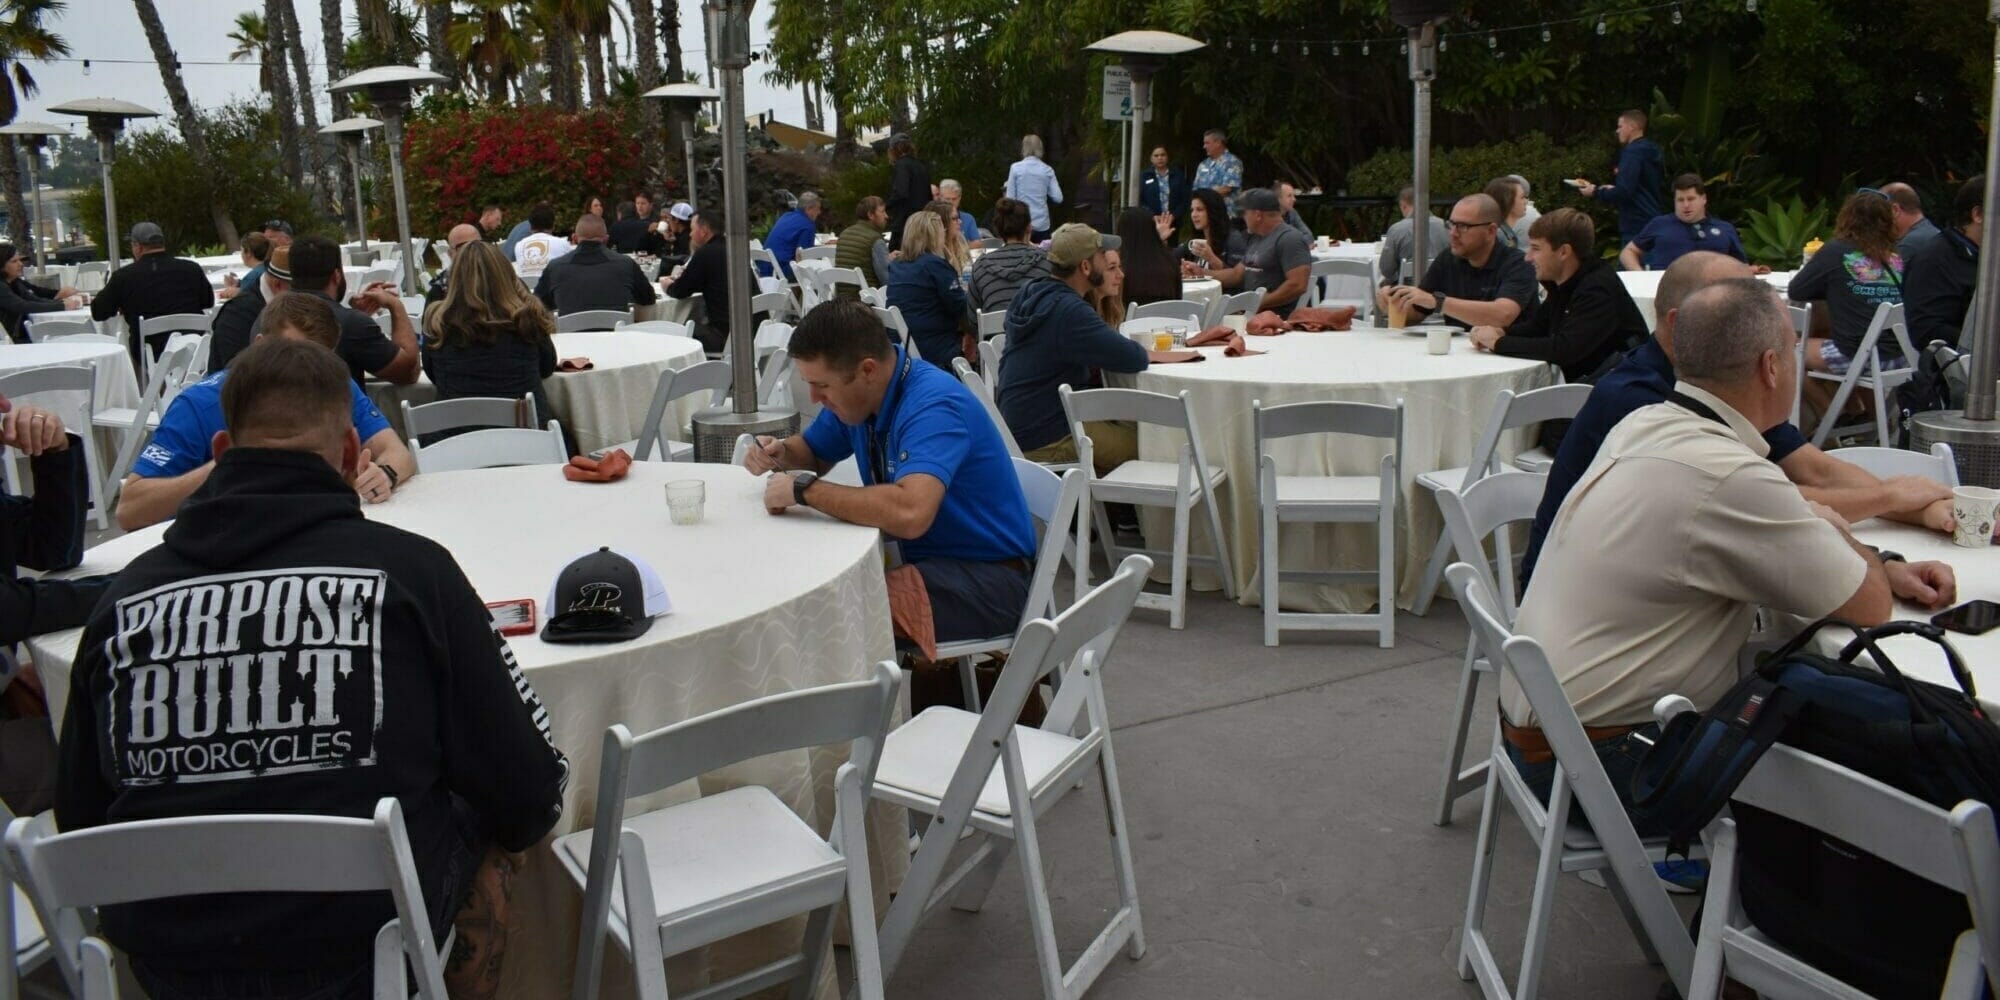 A group of people sitting at tables at an outdoor event featuring Supreme Boats.